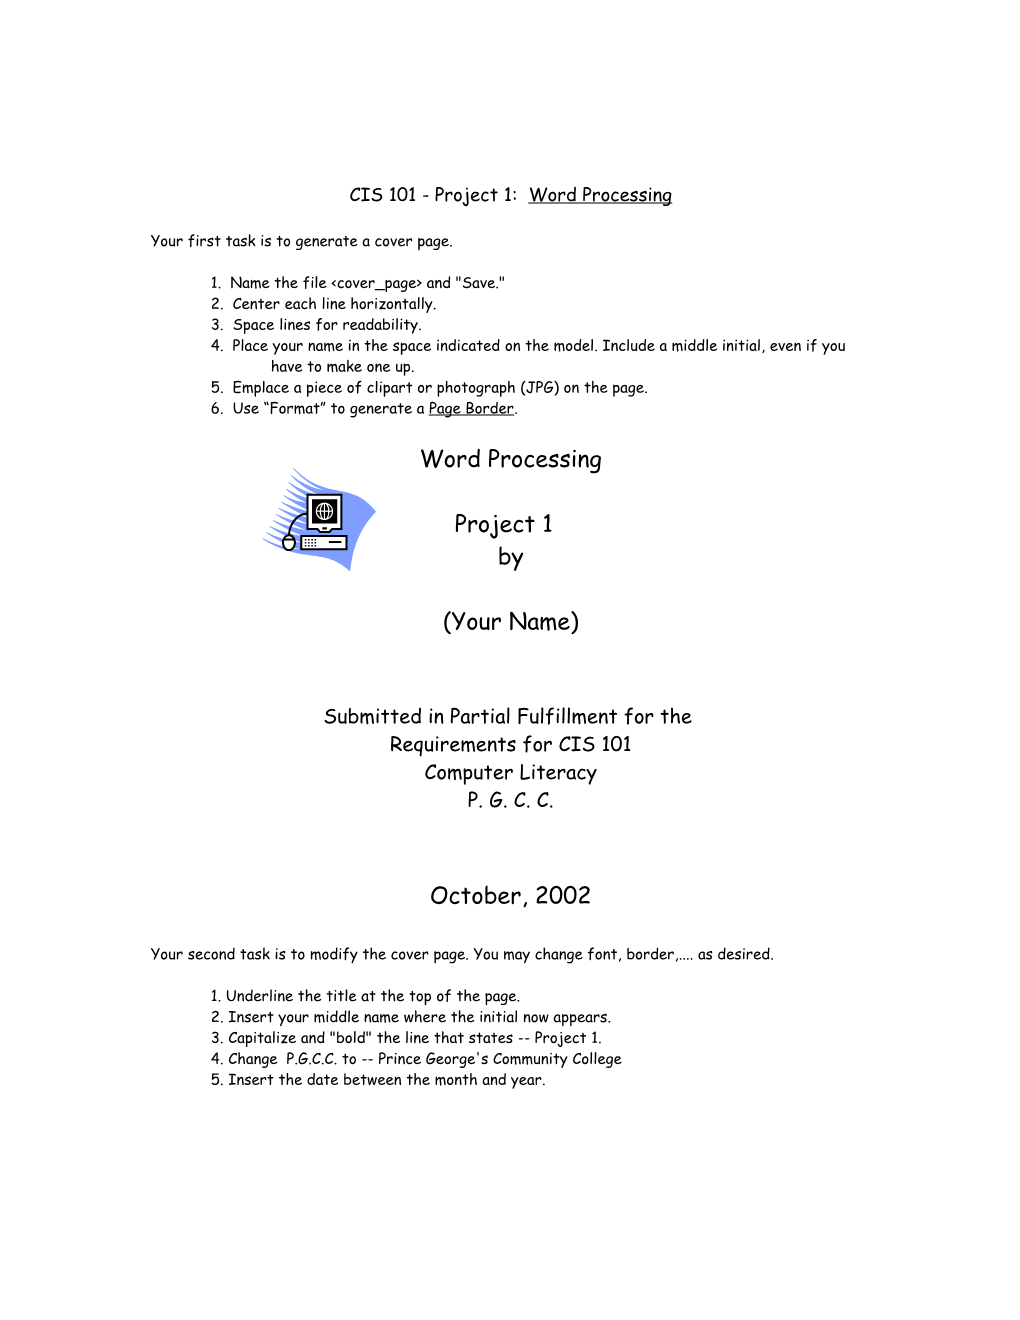 CIS 101 - Project 1: Word Processing